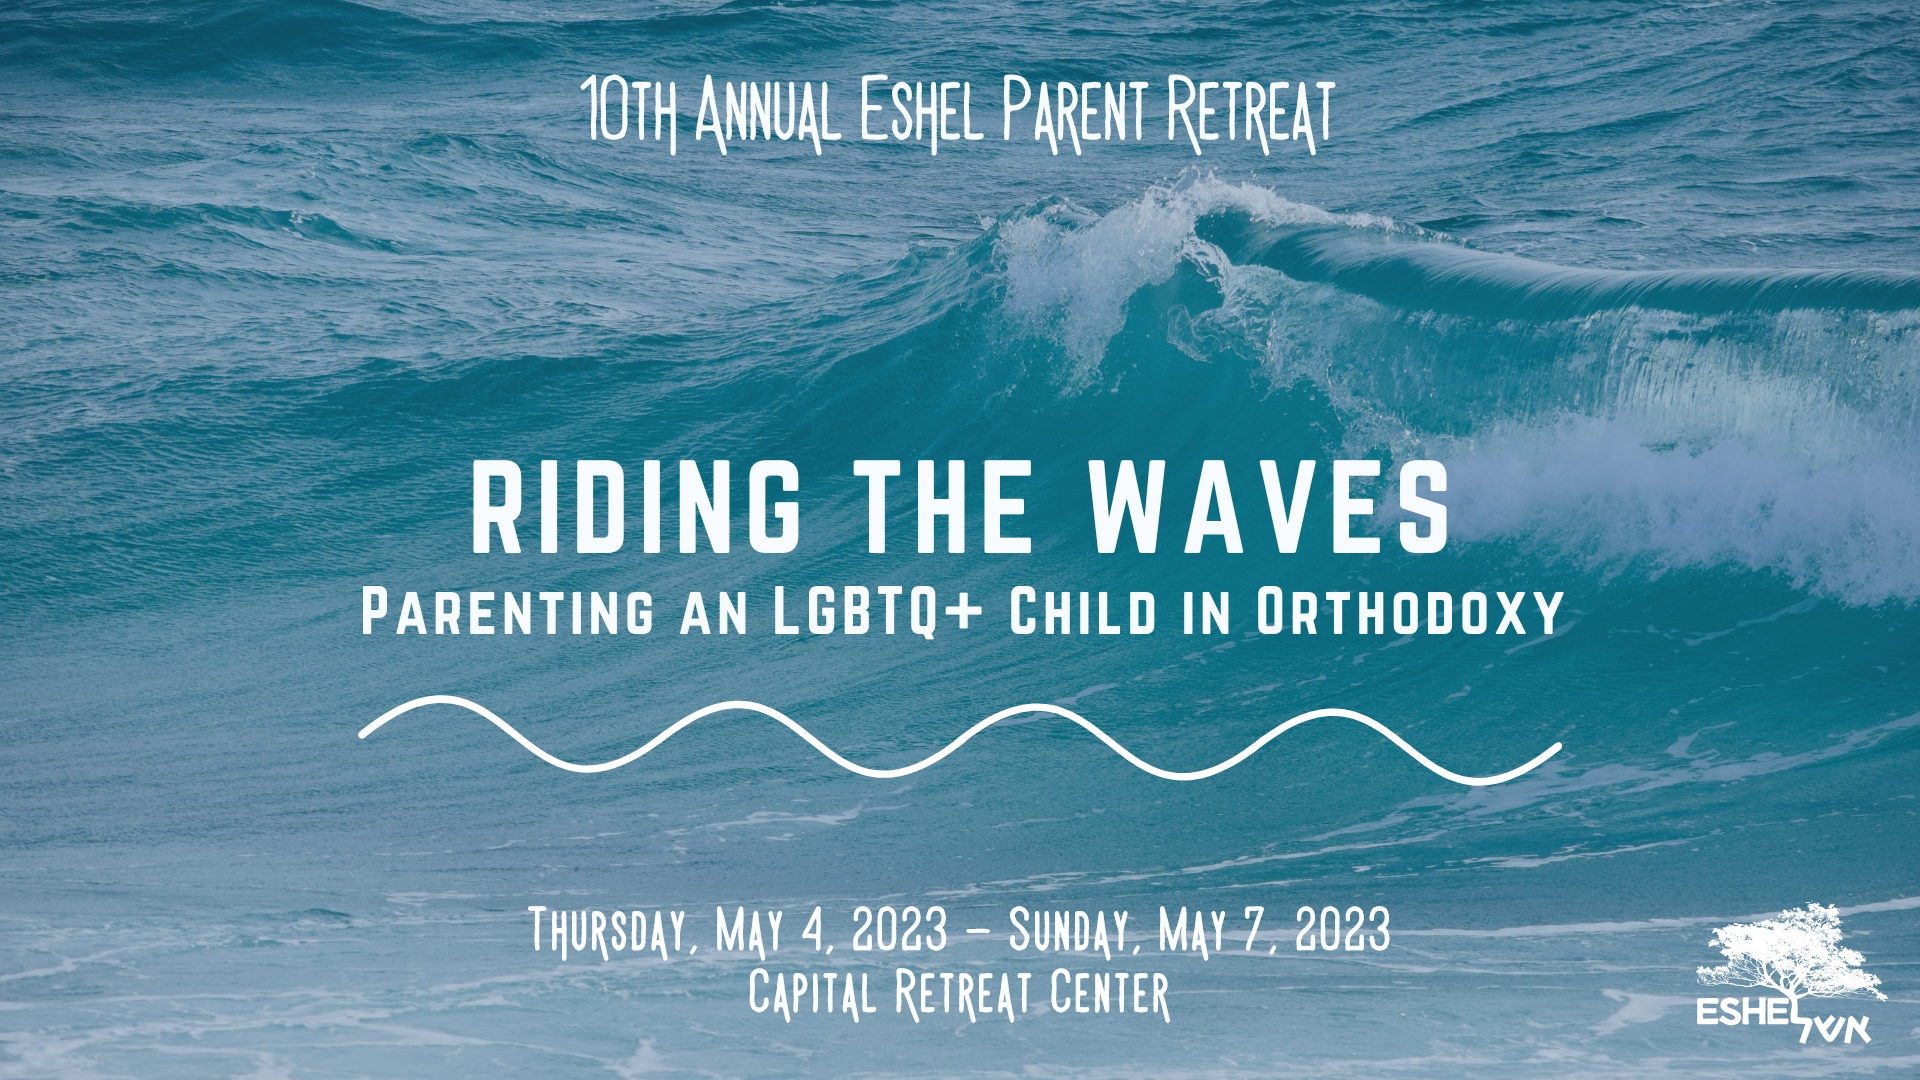 2023 Parent Retreat: Thursday May 4 - Sunday May 7 | Register Today!